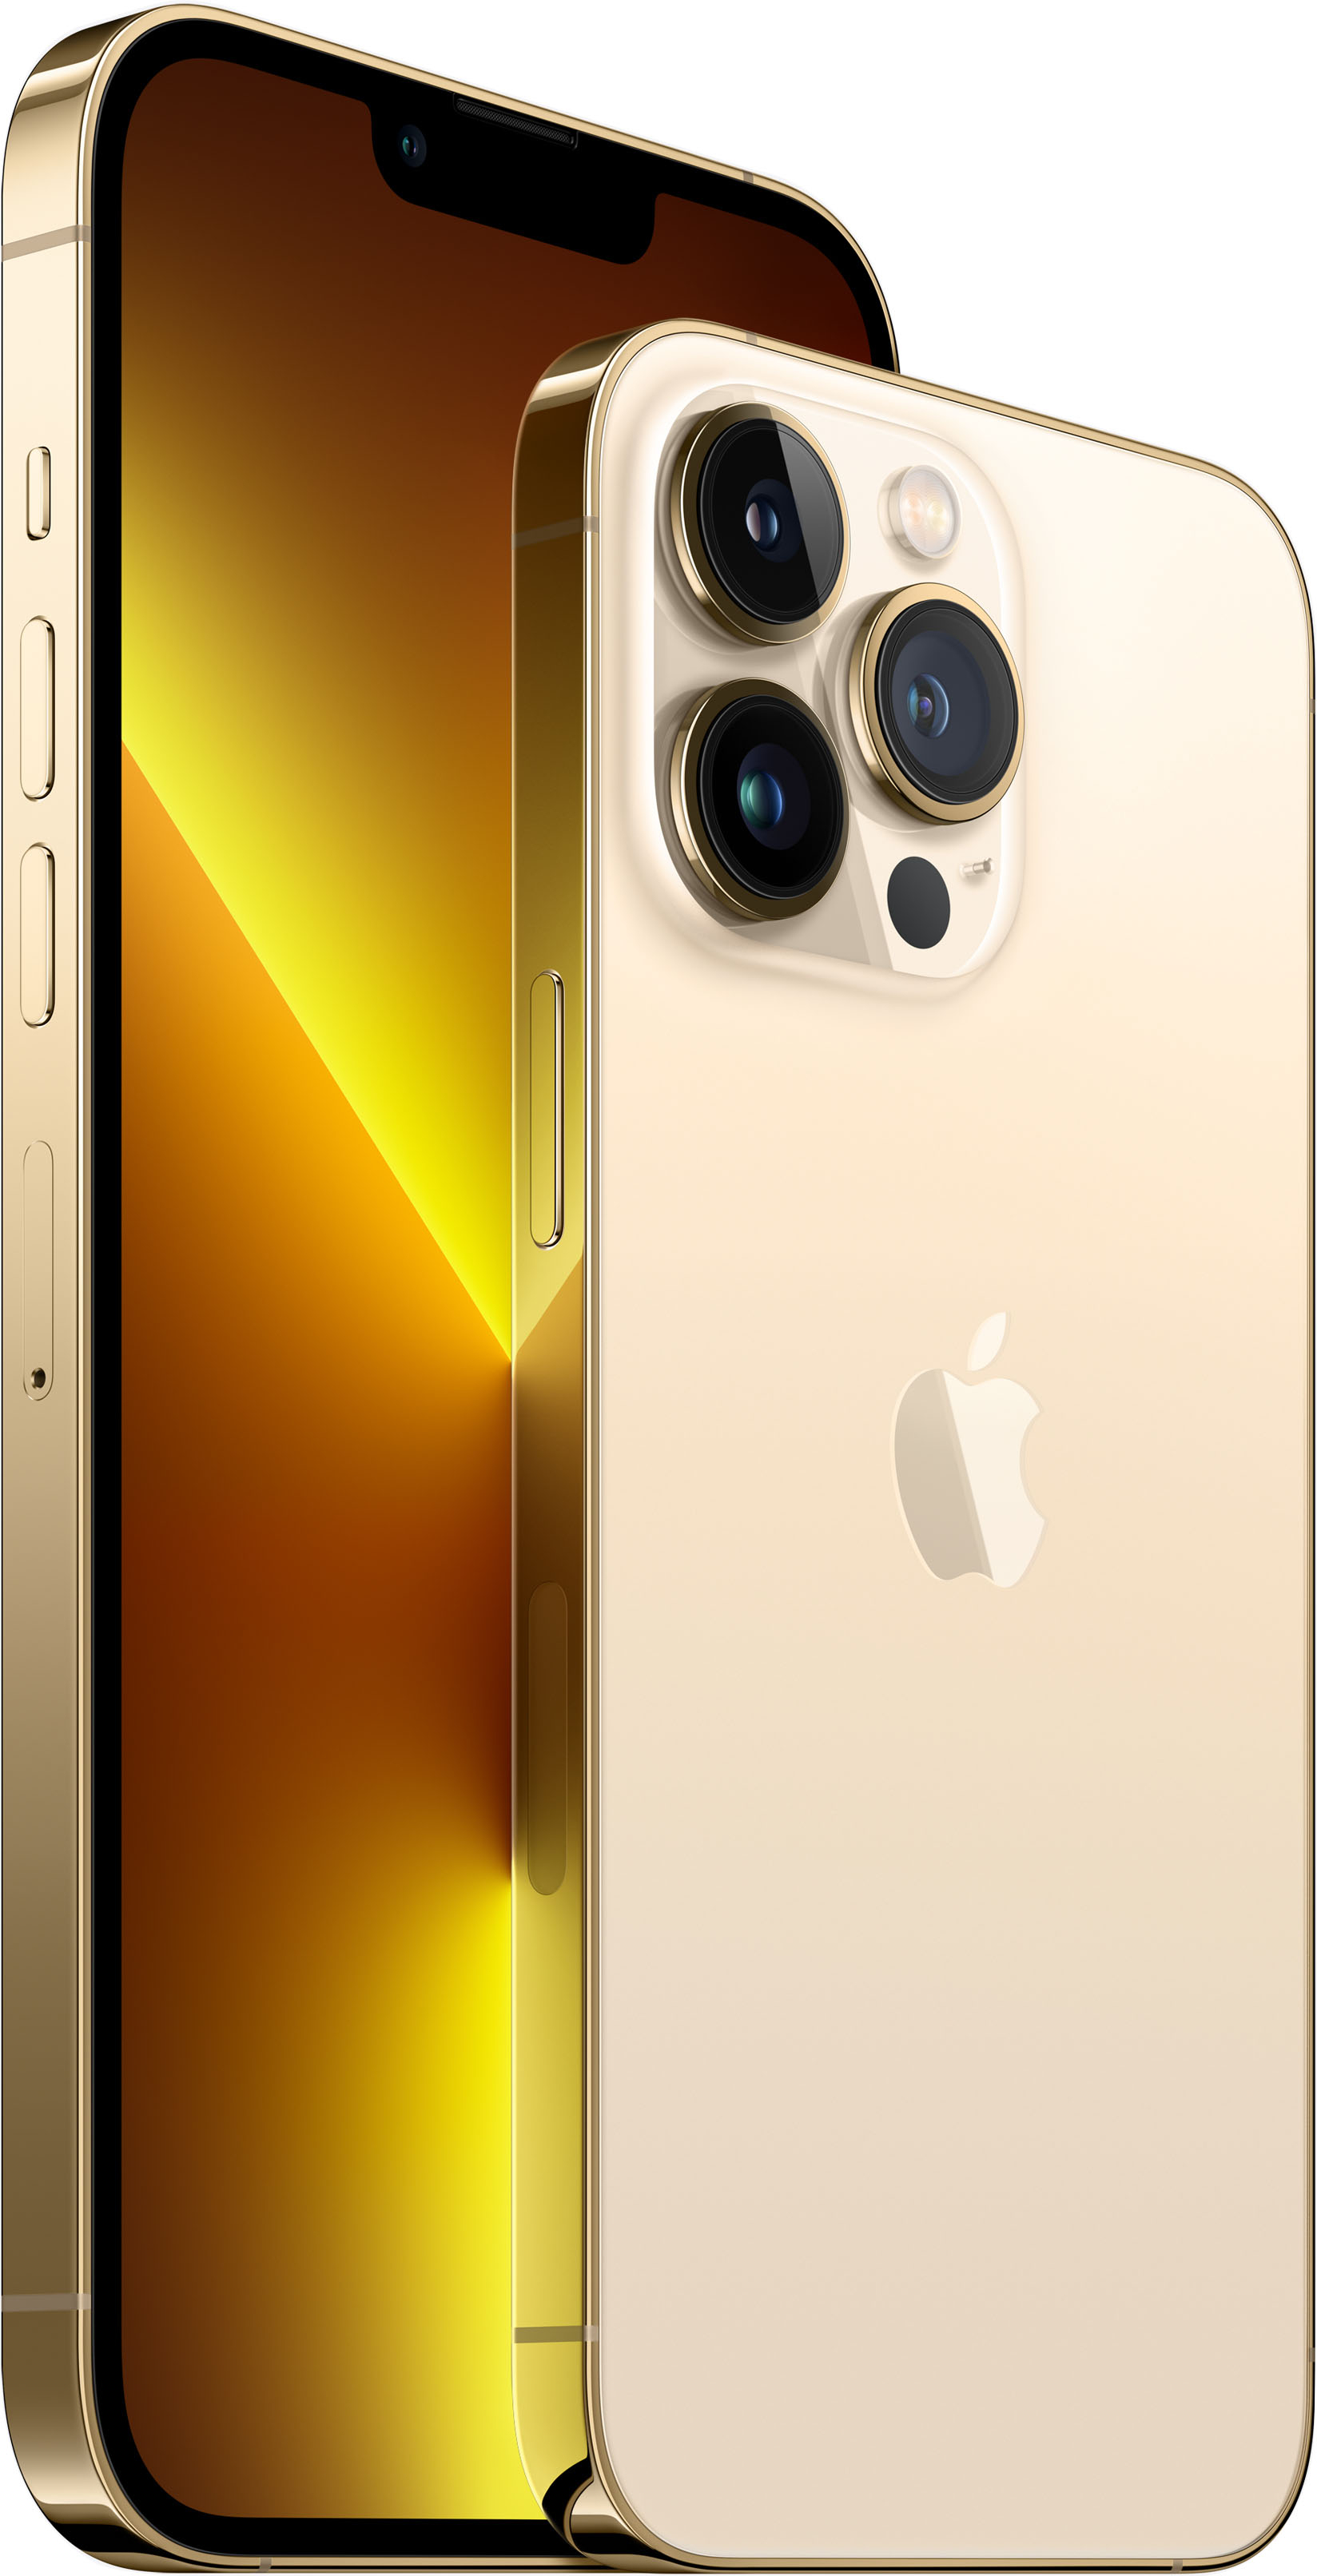 Apple Iphone 13 Pro Max 5g 512gb Gold At T Mlky3ll A Best Buy